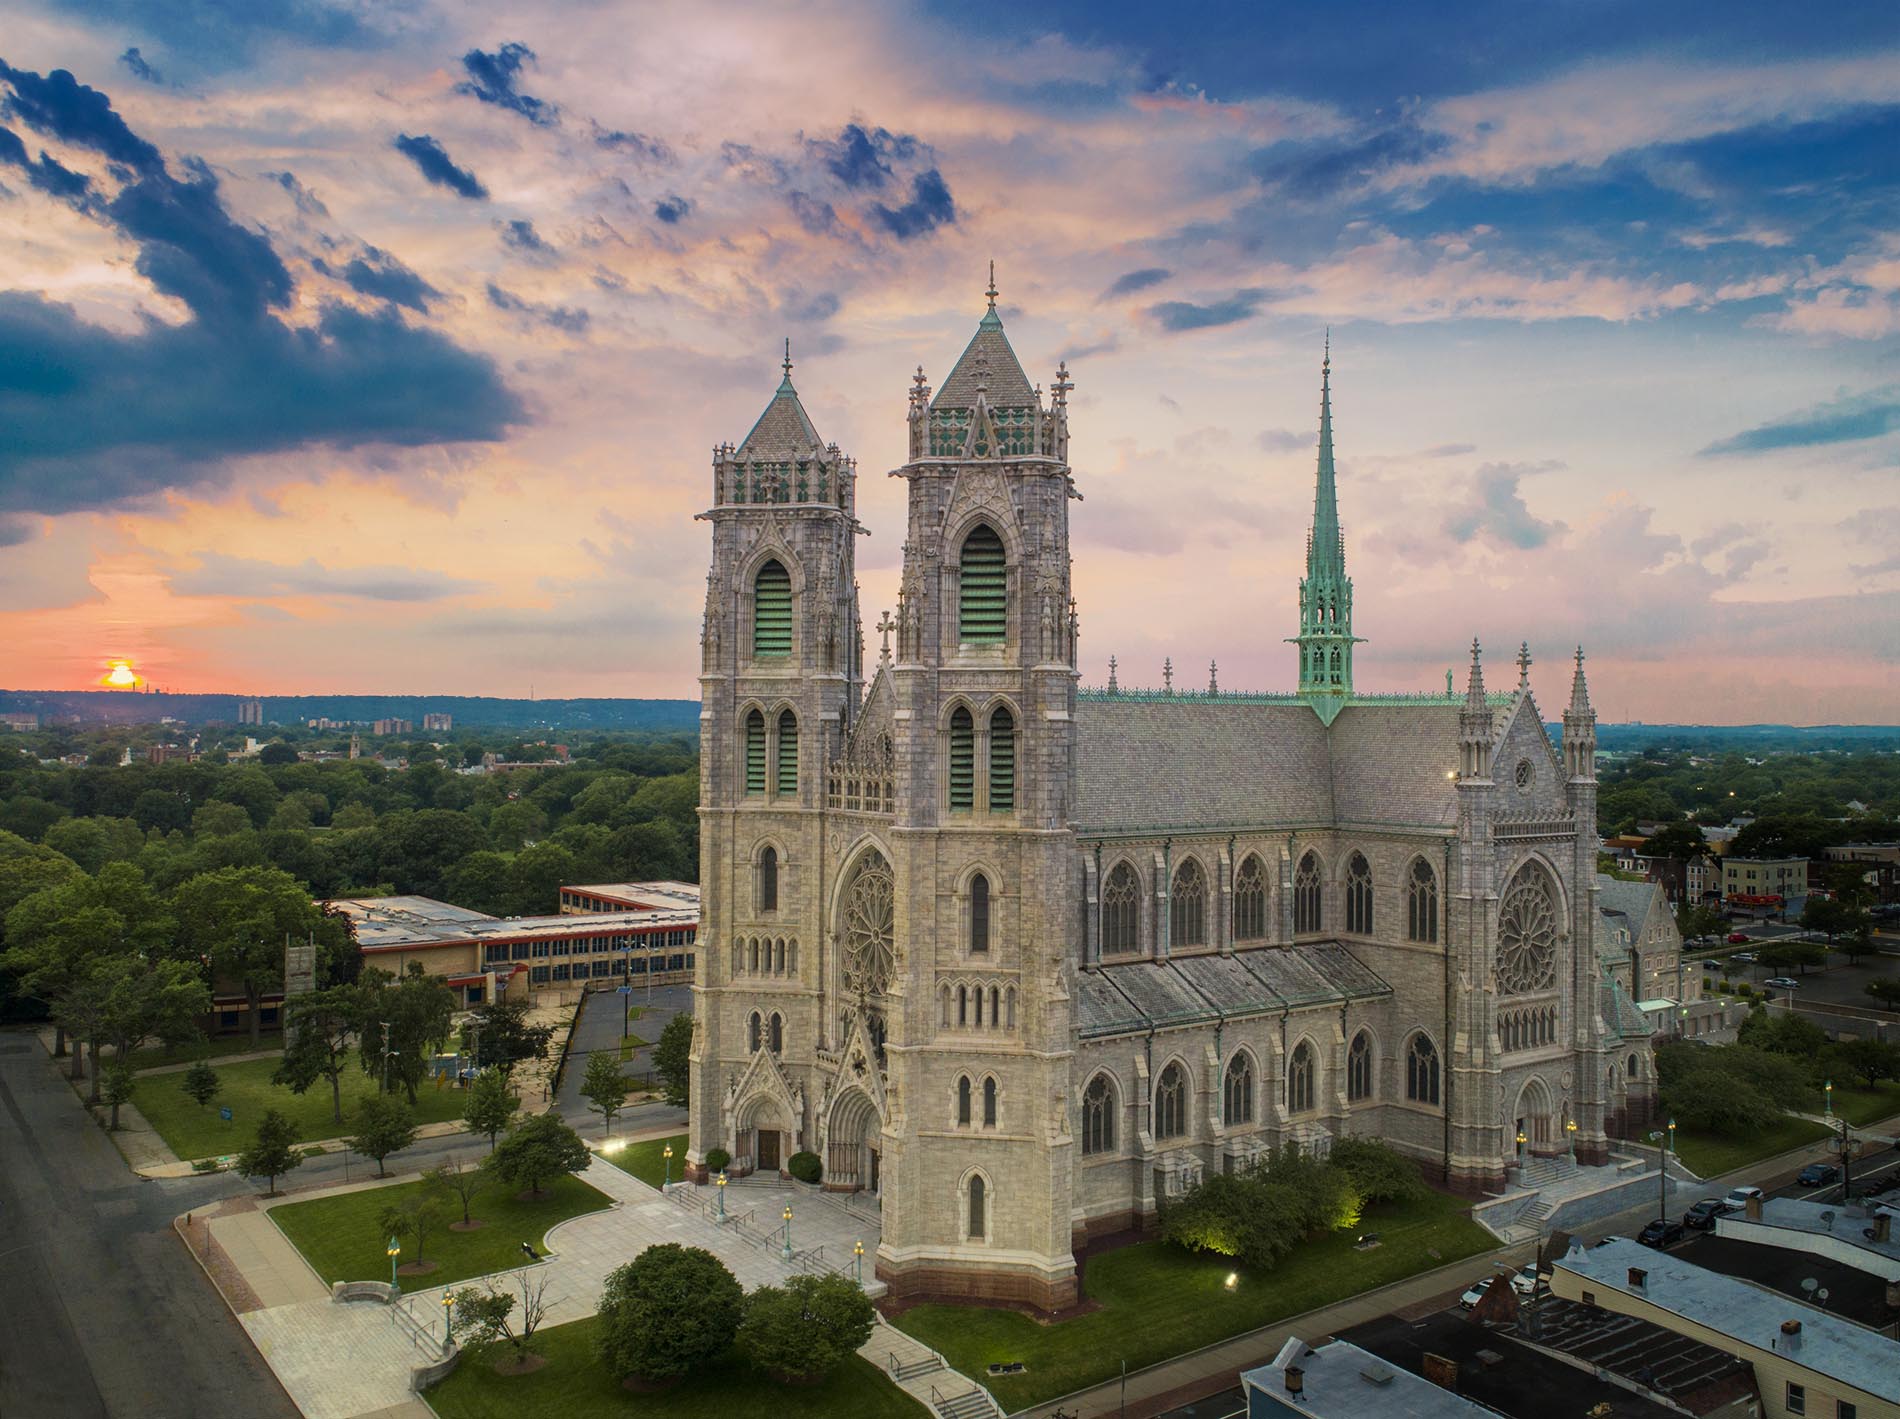 Drone Photograph taken at sunset of Sacred Heart Bascilica Newark New Jersey